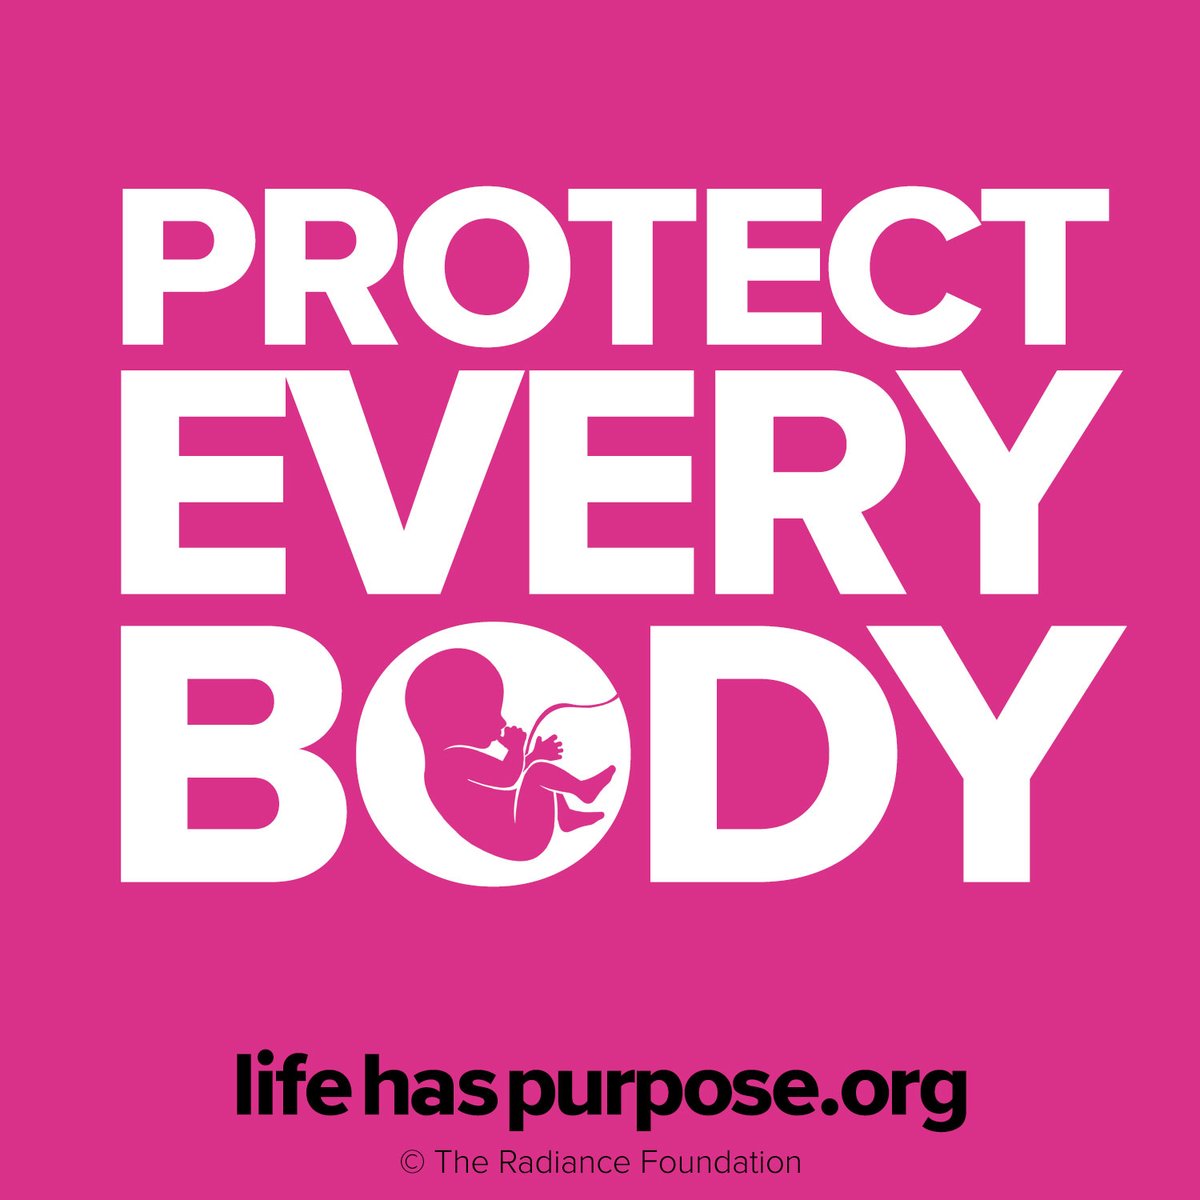 Protect EVERY body. #WhyWeMarch #MarchForLife